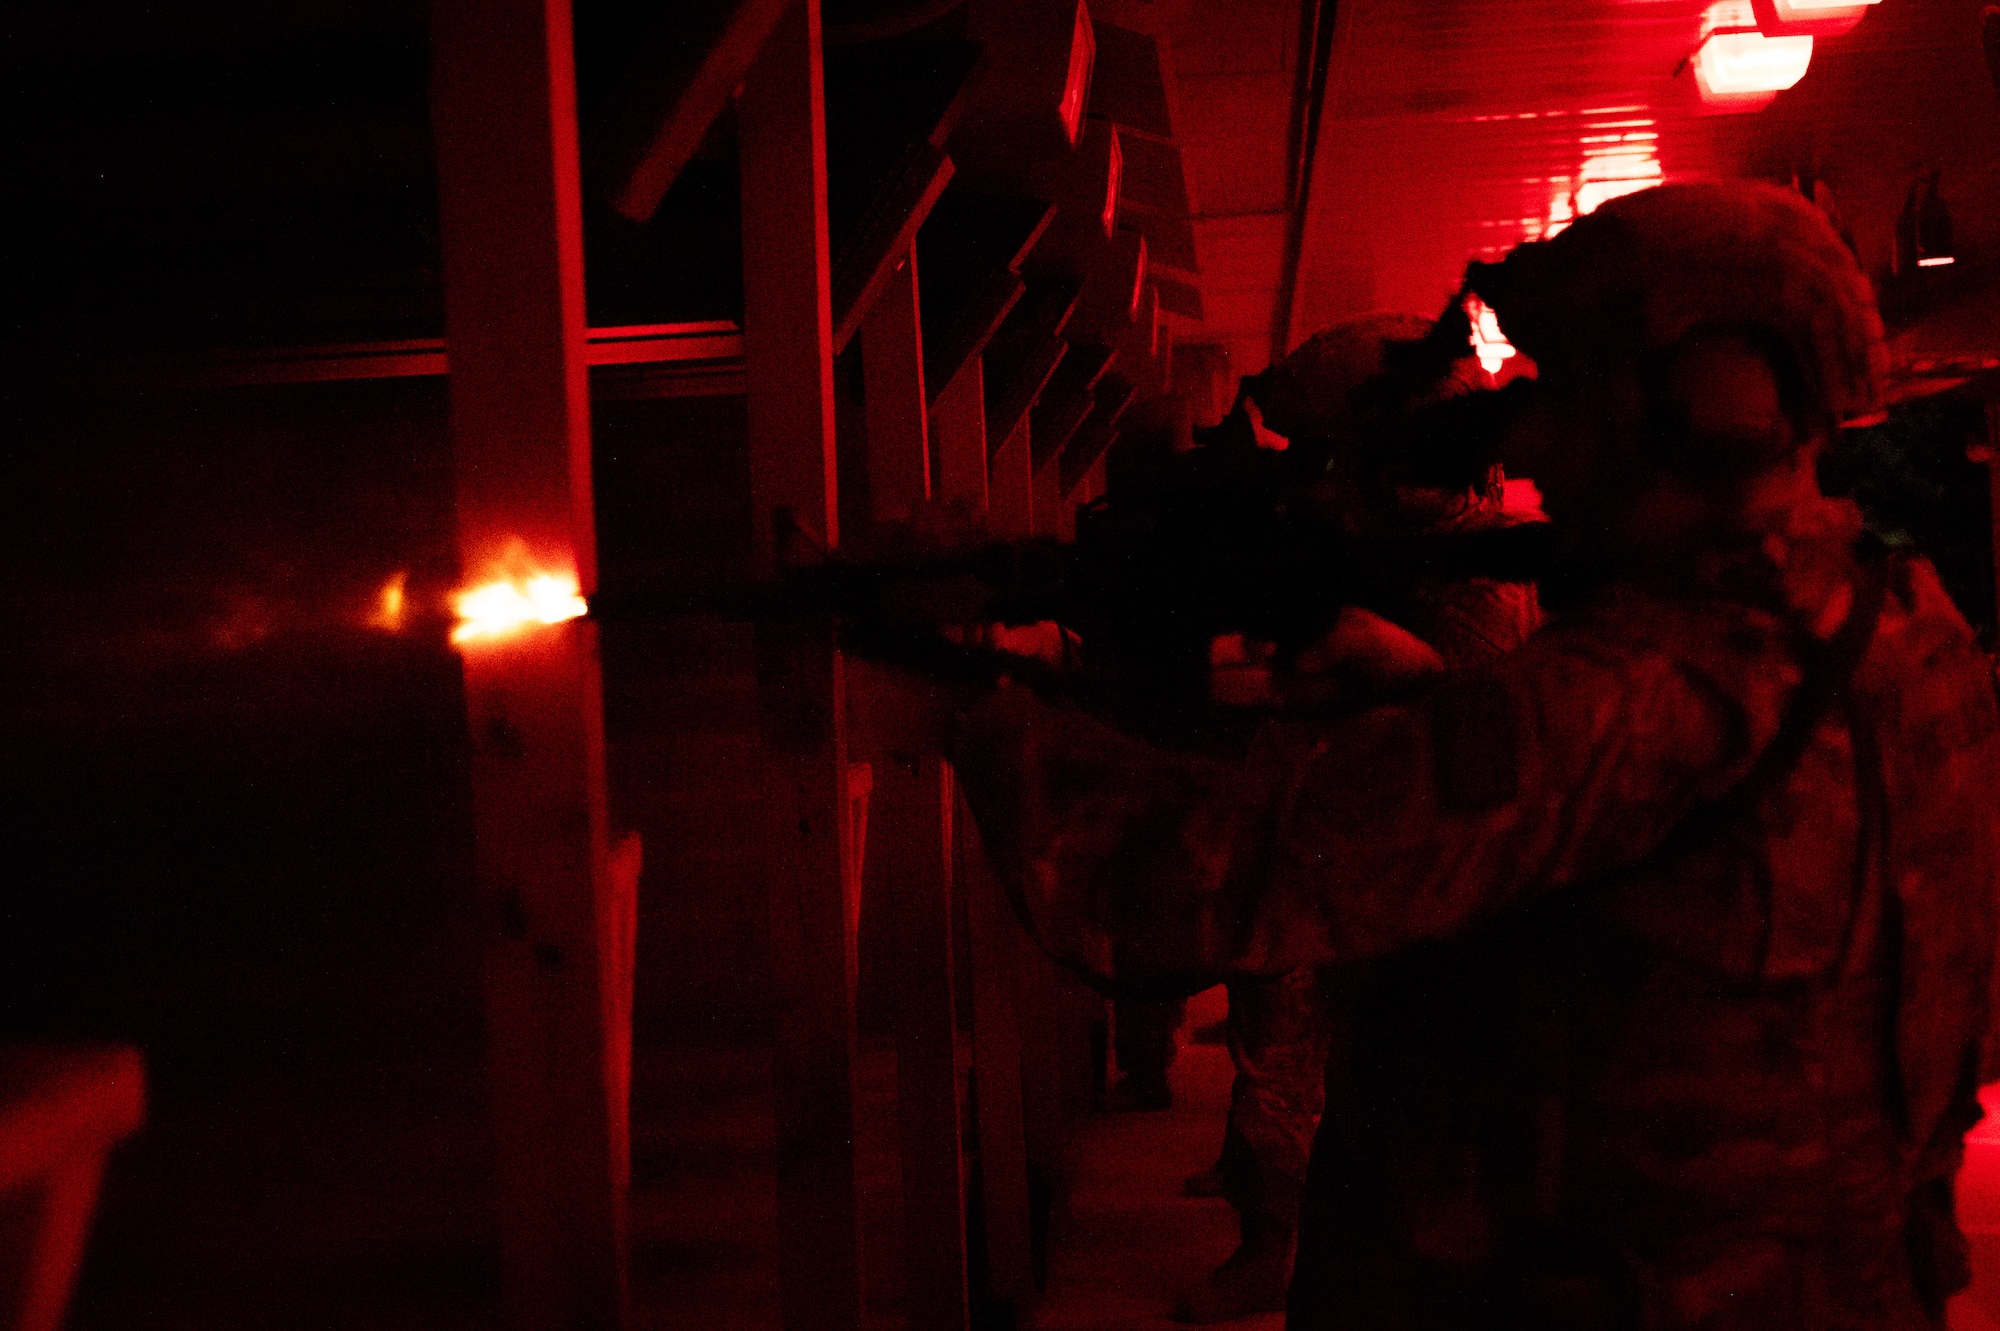 A red and black image that shows the side profile of a military member holding a weapon. At the tip of the weapon, a flash of light that indicates a bullet has been fired.